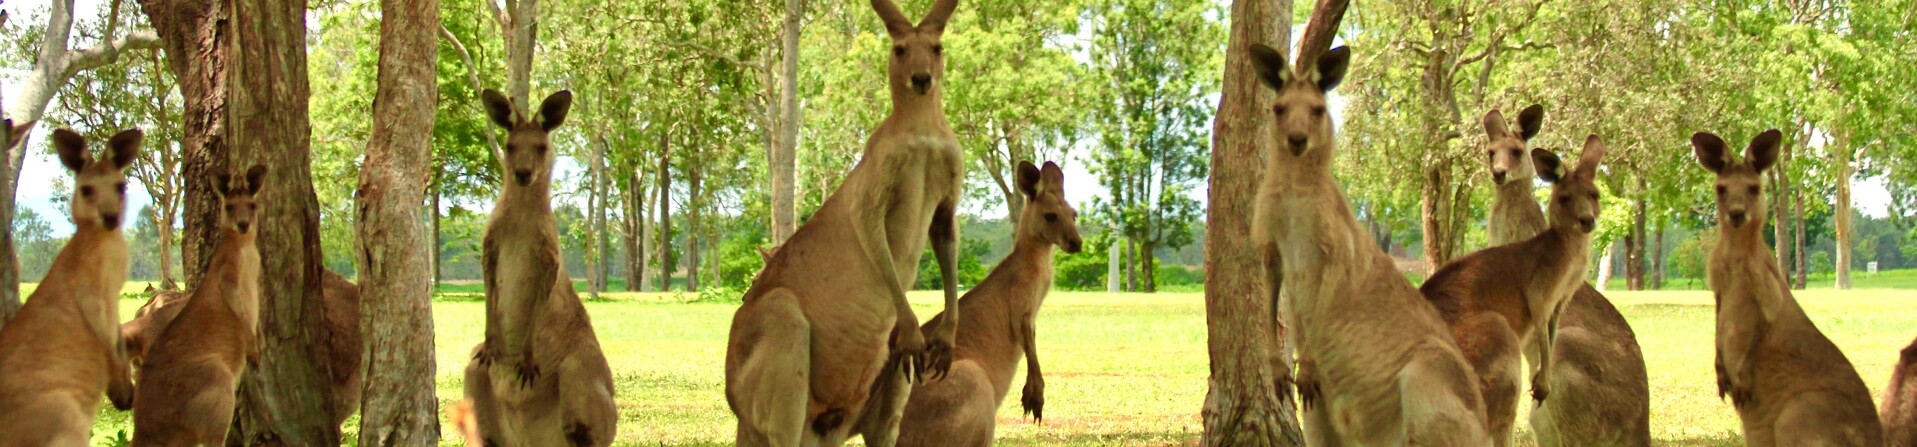 Are there kangaroos in Sydney?